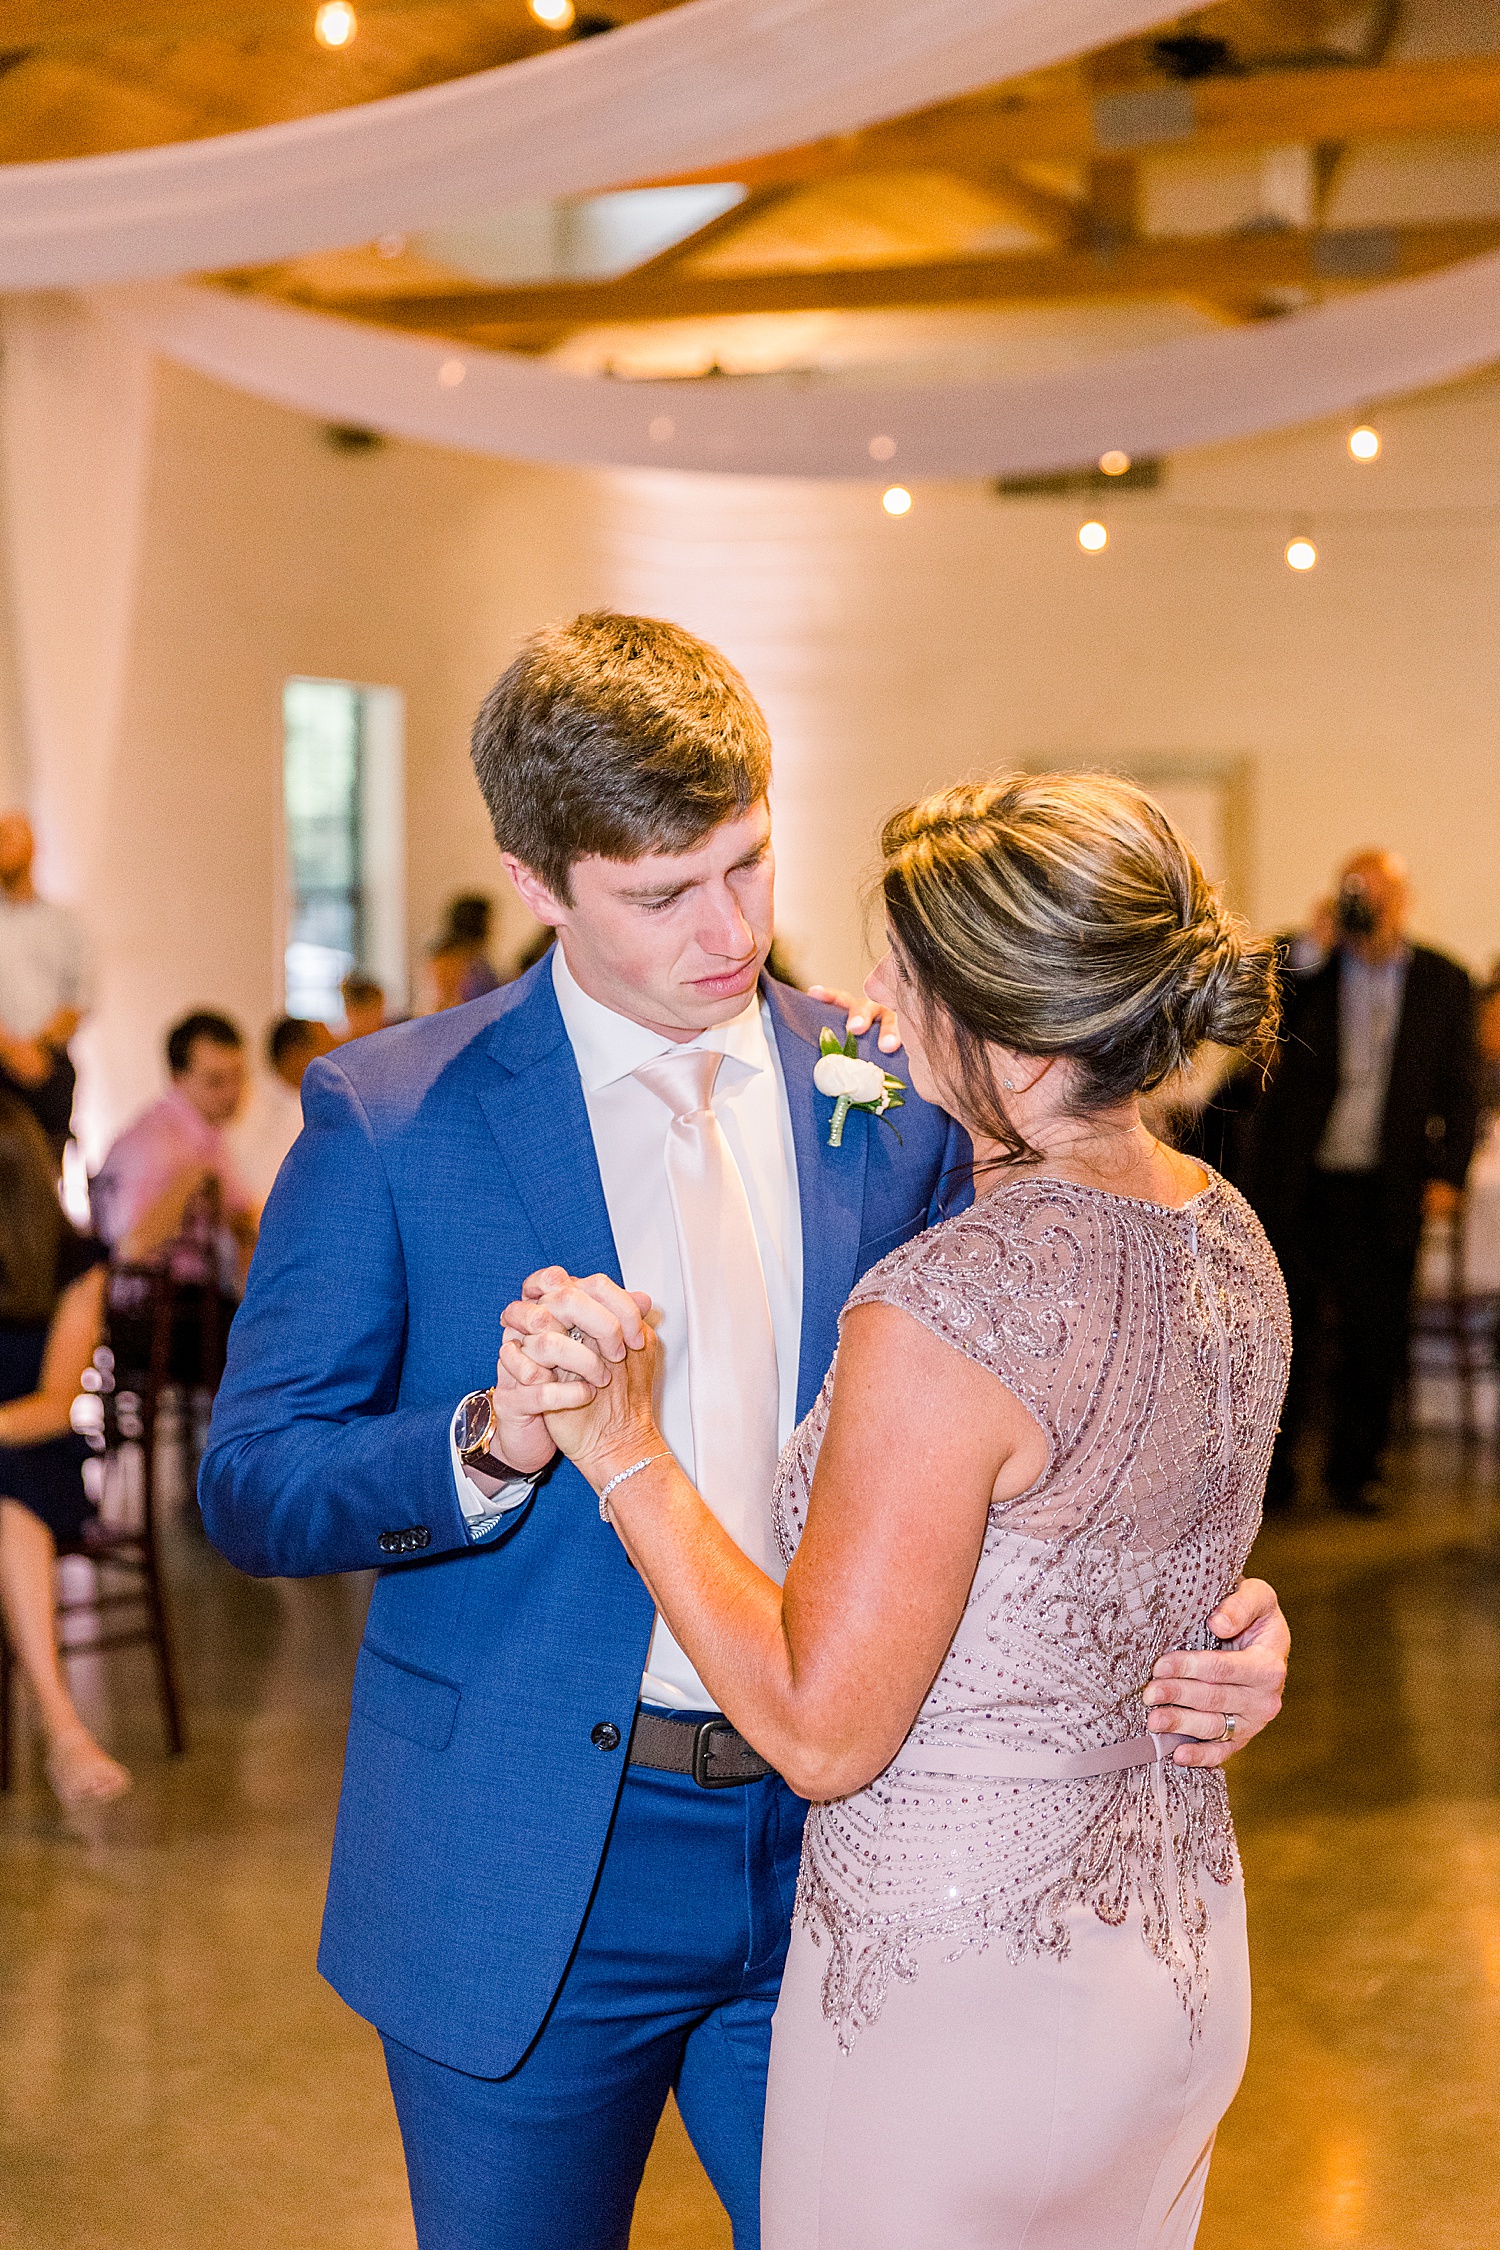 Groom and mother dance together during mother-son dance at AL wedding reception